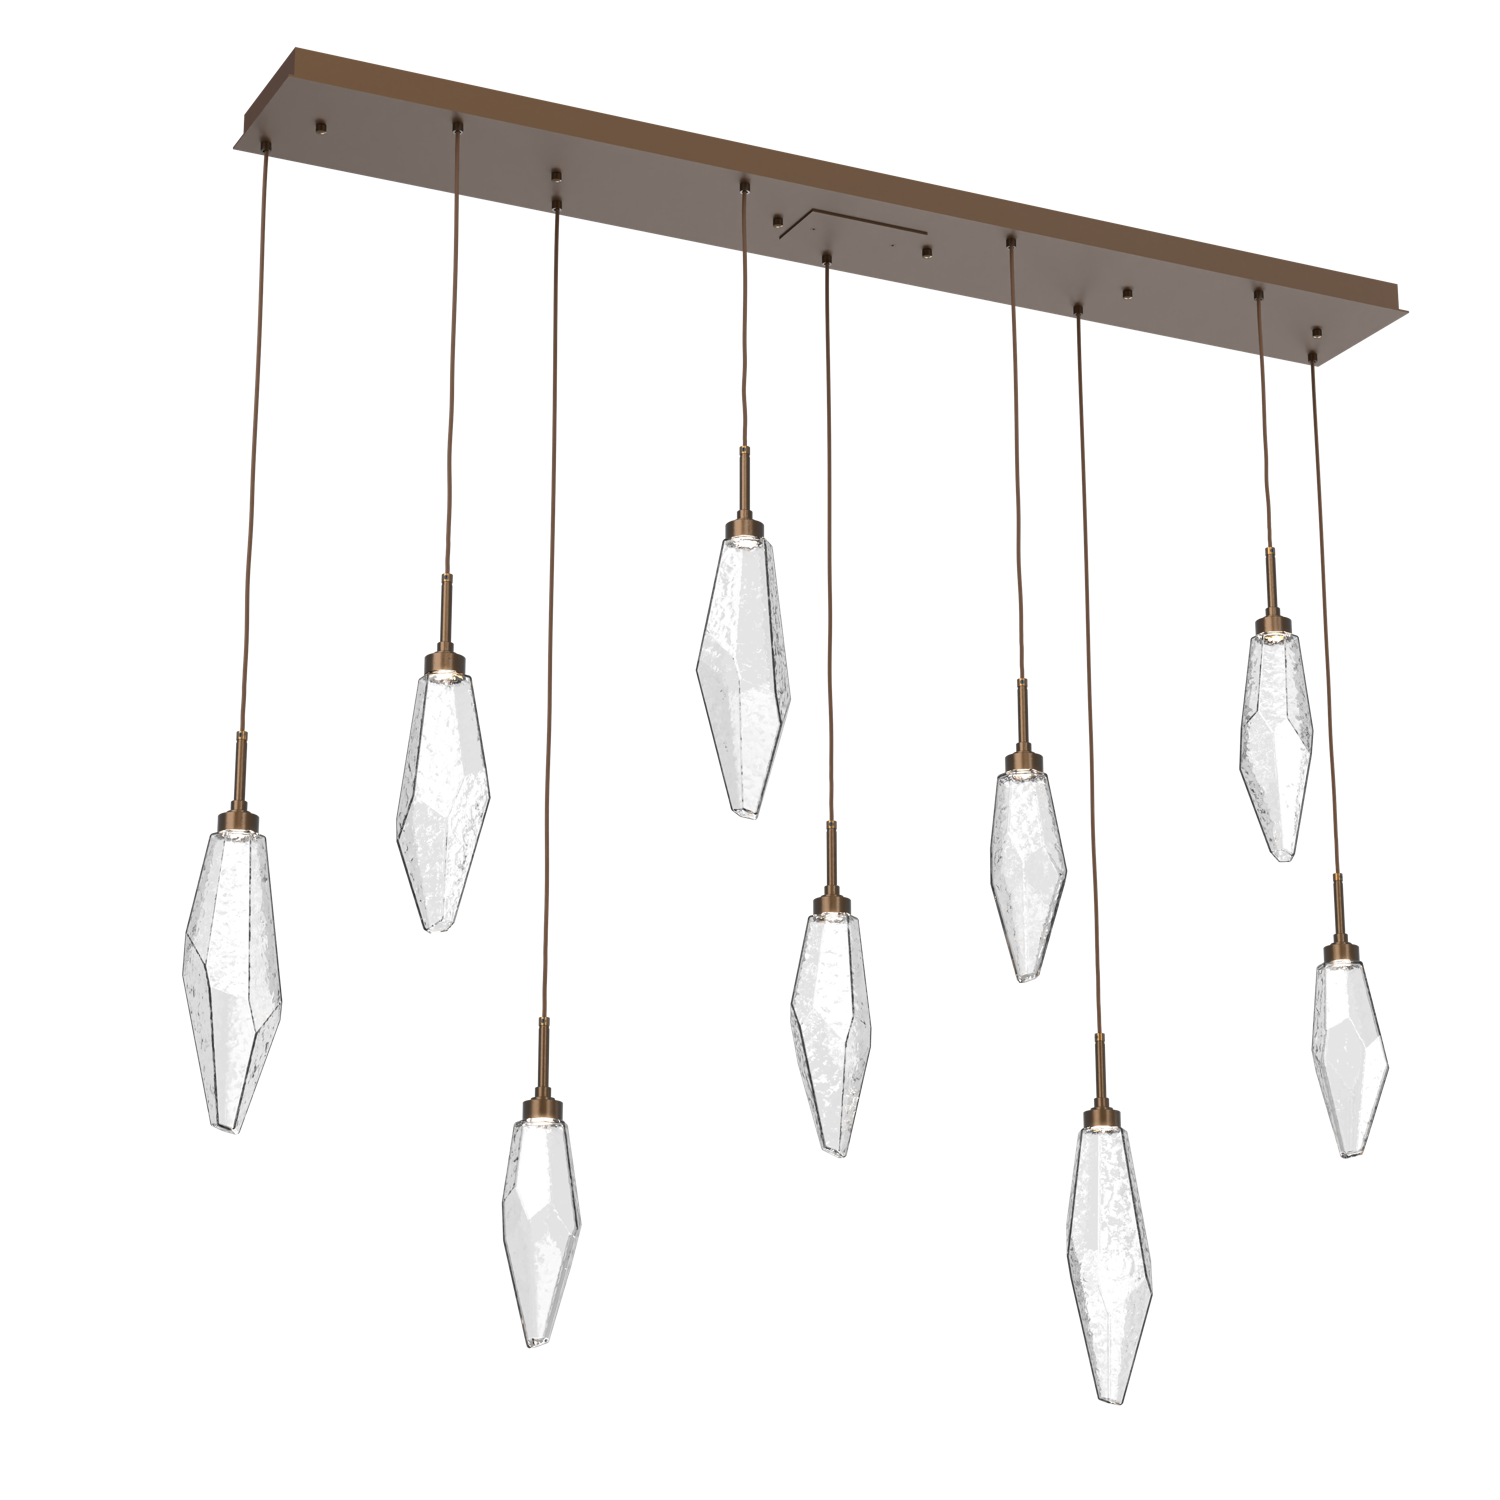 PLB0050-09-FB-CC-Hammerton-Studio-Rock-Crystal-9-light-linear-pendant-chandelier-with-flat-bronze-finish-and-clear-glass-shades-and-LED-lamping